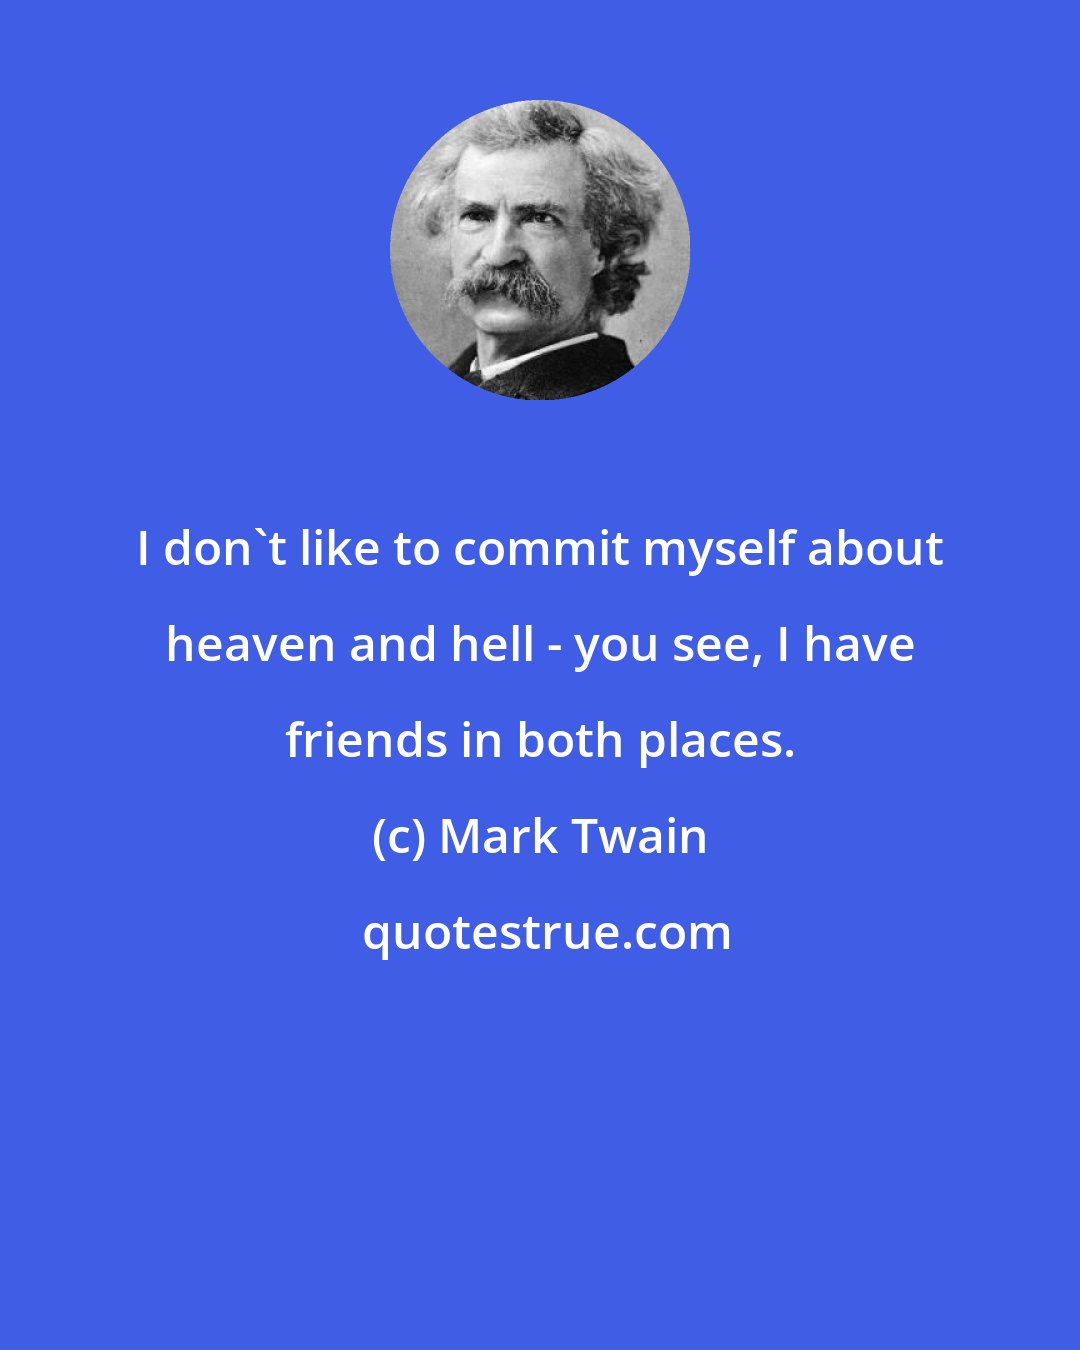 Mark Twain: I don't like to commit myself about heaven and hell - you see, I have friends in both places.